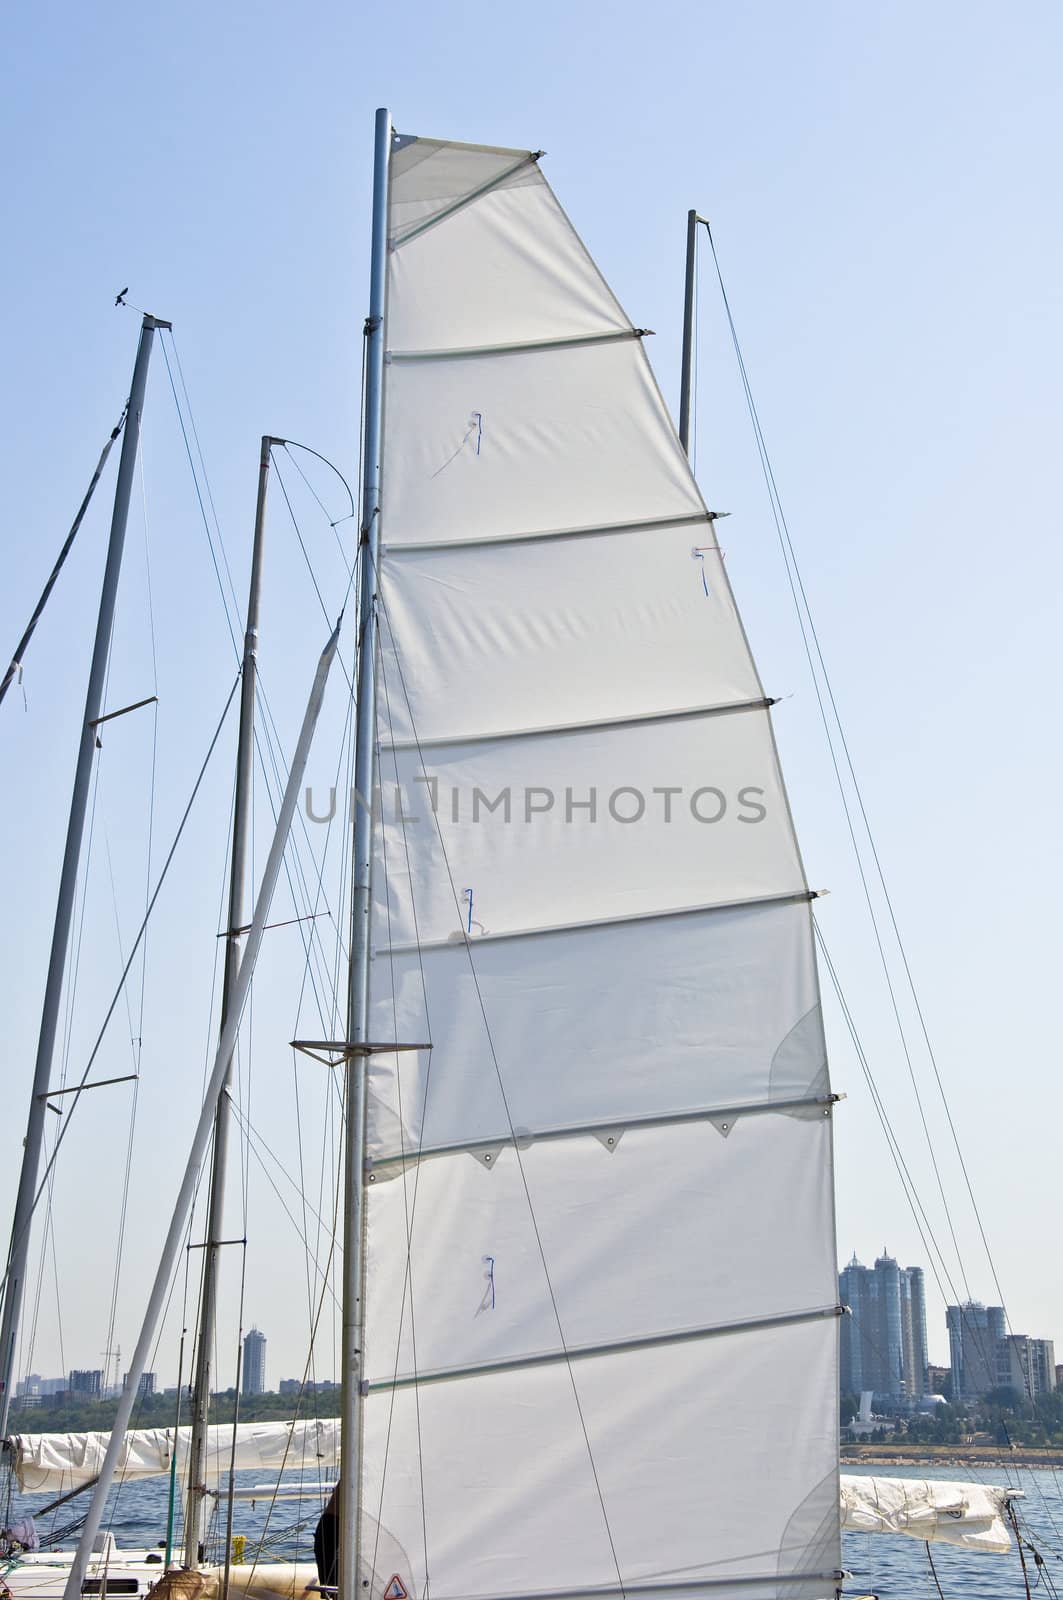 Mast yacht with a sail. Against the backdrop of the river and a major port city in Russia.